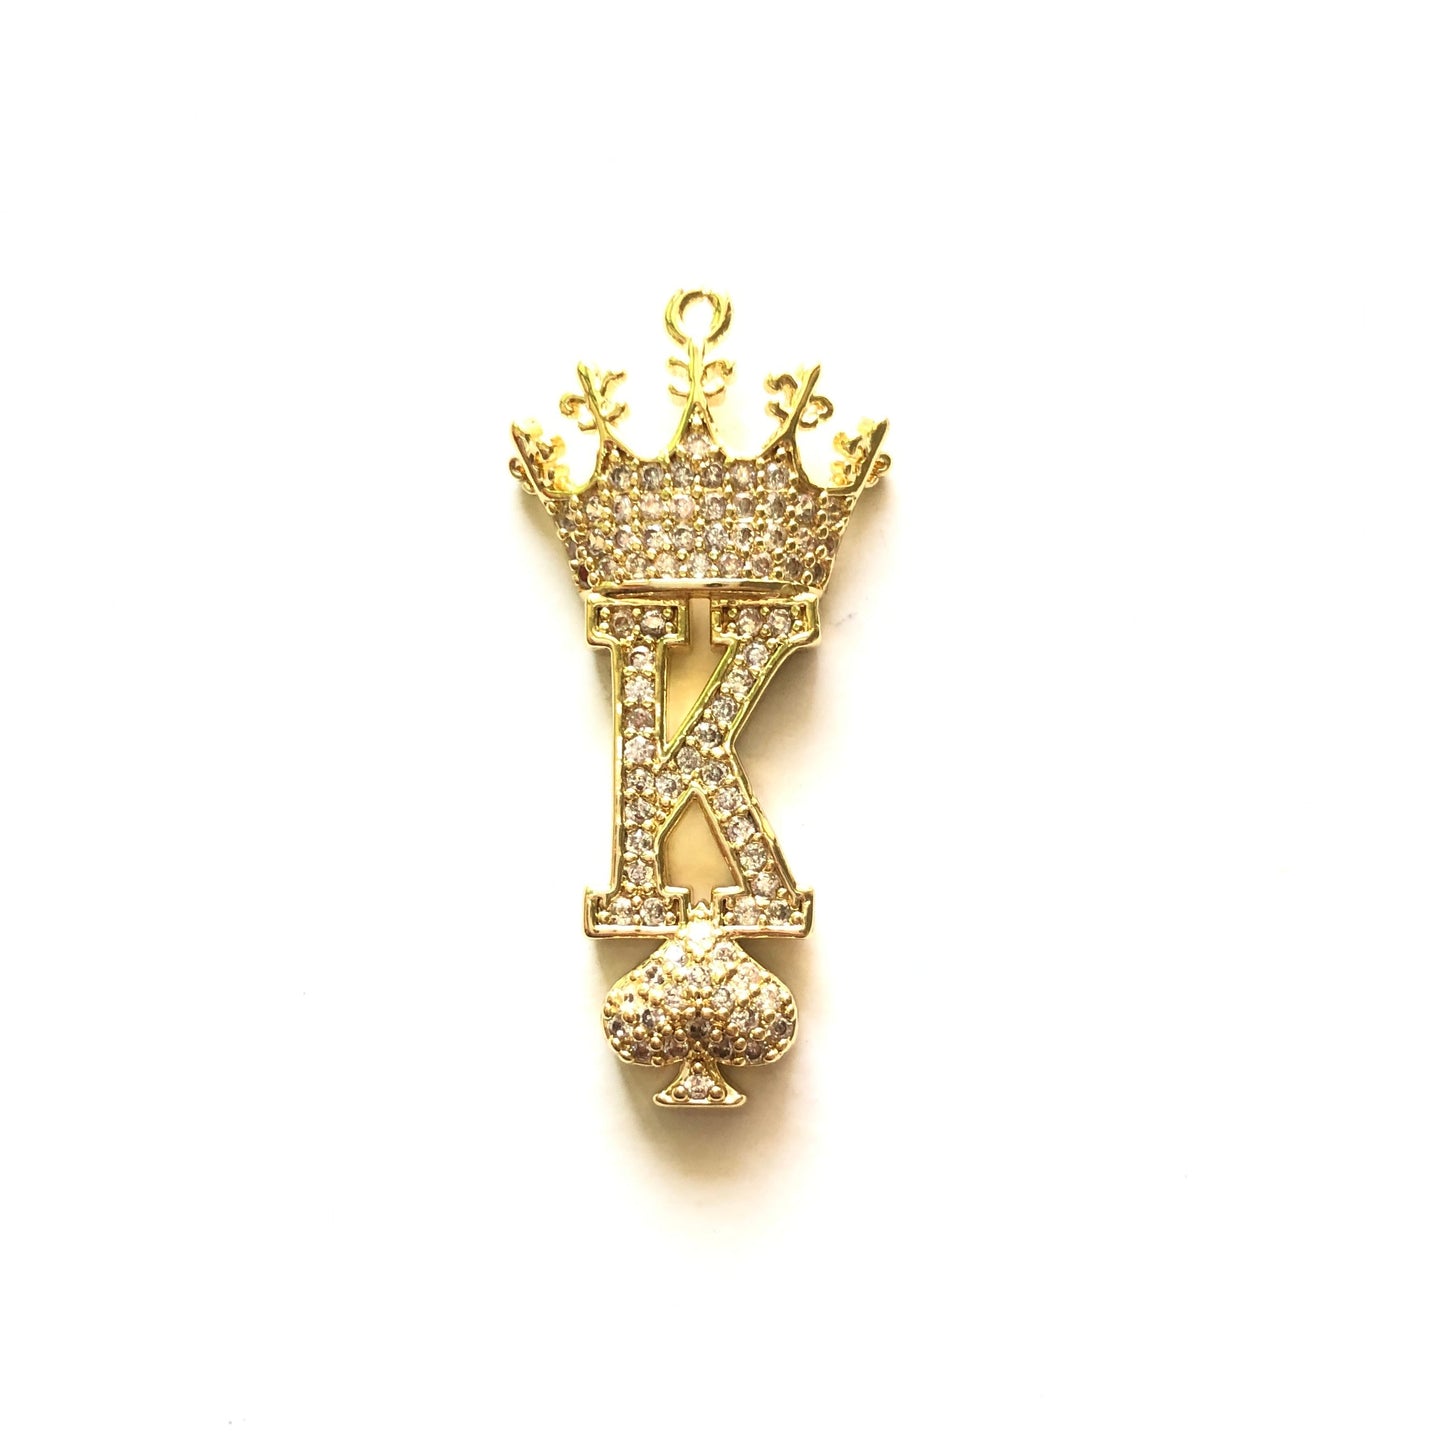 10pcs/lot 34*15mm CZ Paved King of Spades Charms Gold CZ Paved Charms Queen Charms Words & Quotes Charms Beads Beyond